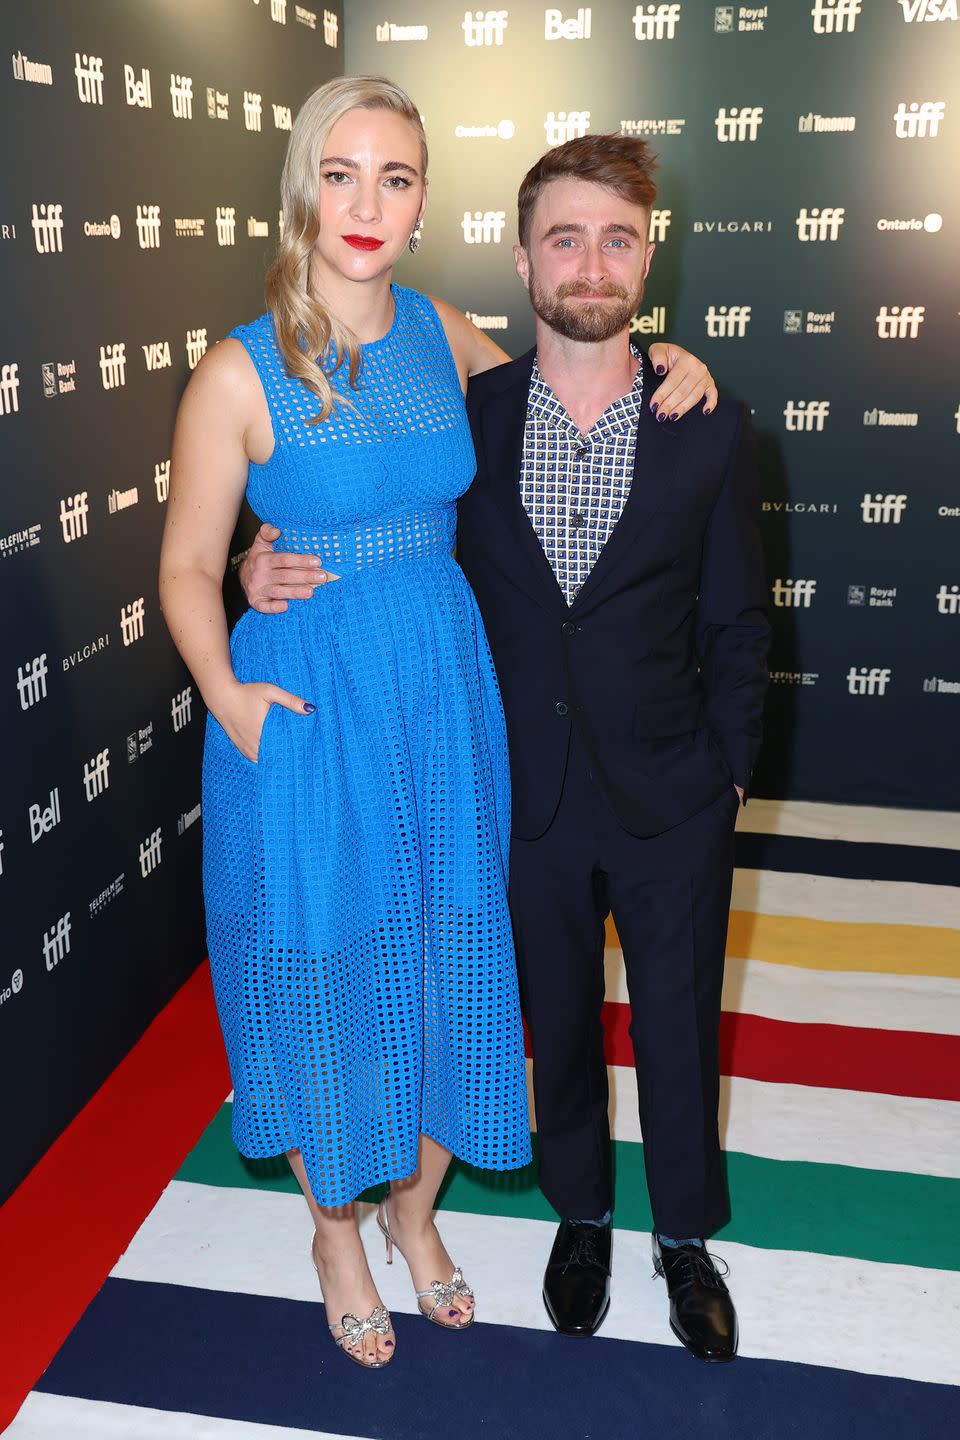 toronto, ontario september 08 l r erin darke and daniel radcliffe attend the weird the al yankovic story premiere during the 2022 toronto international film festival at royal alexandra theatre on september 08, 2022 in toronto, ontario photo by leon bennettgetty images